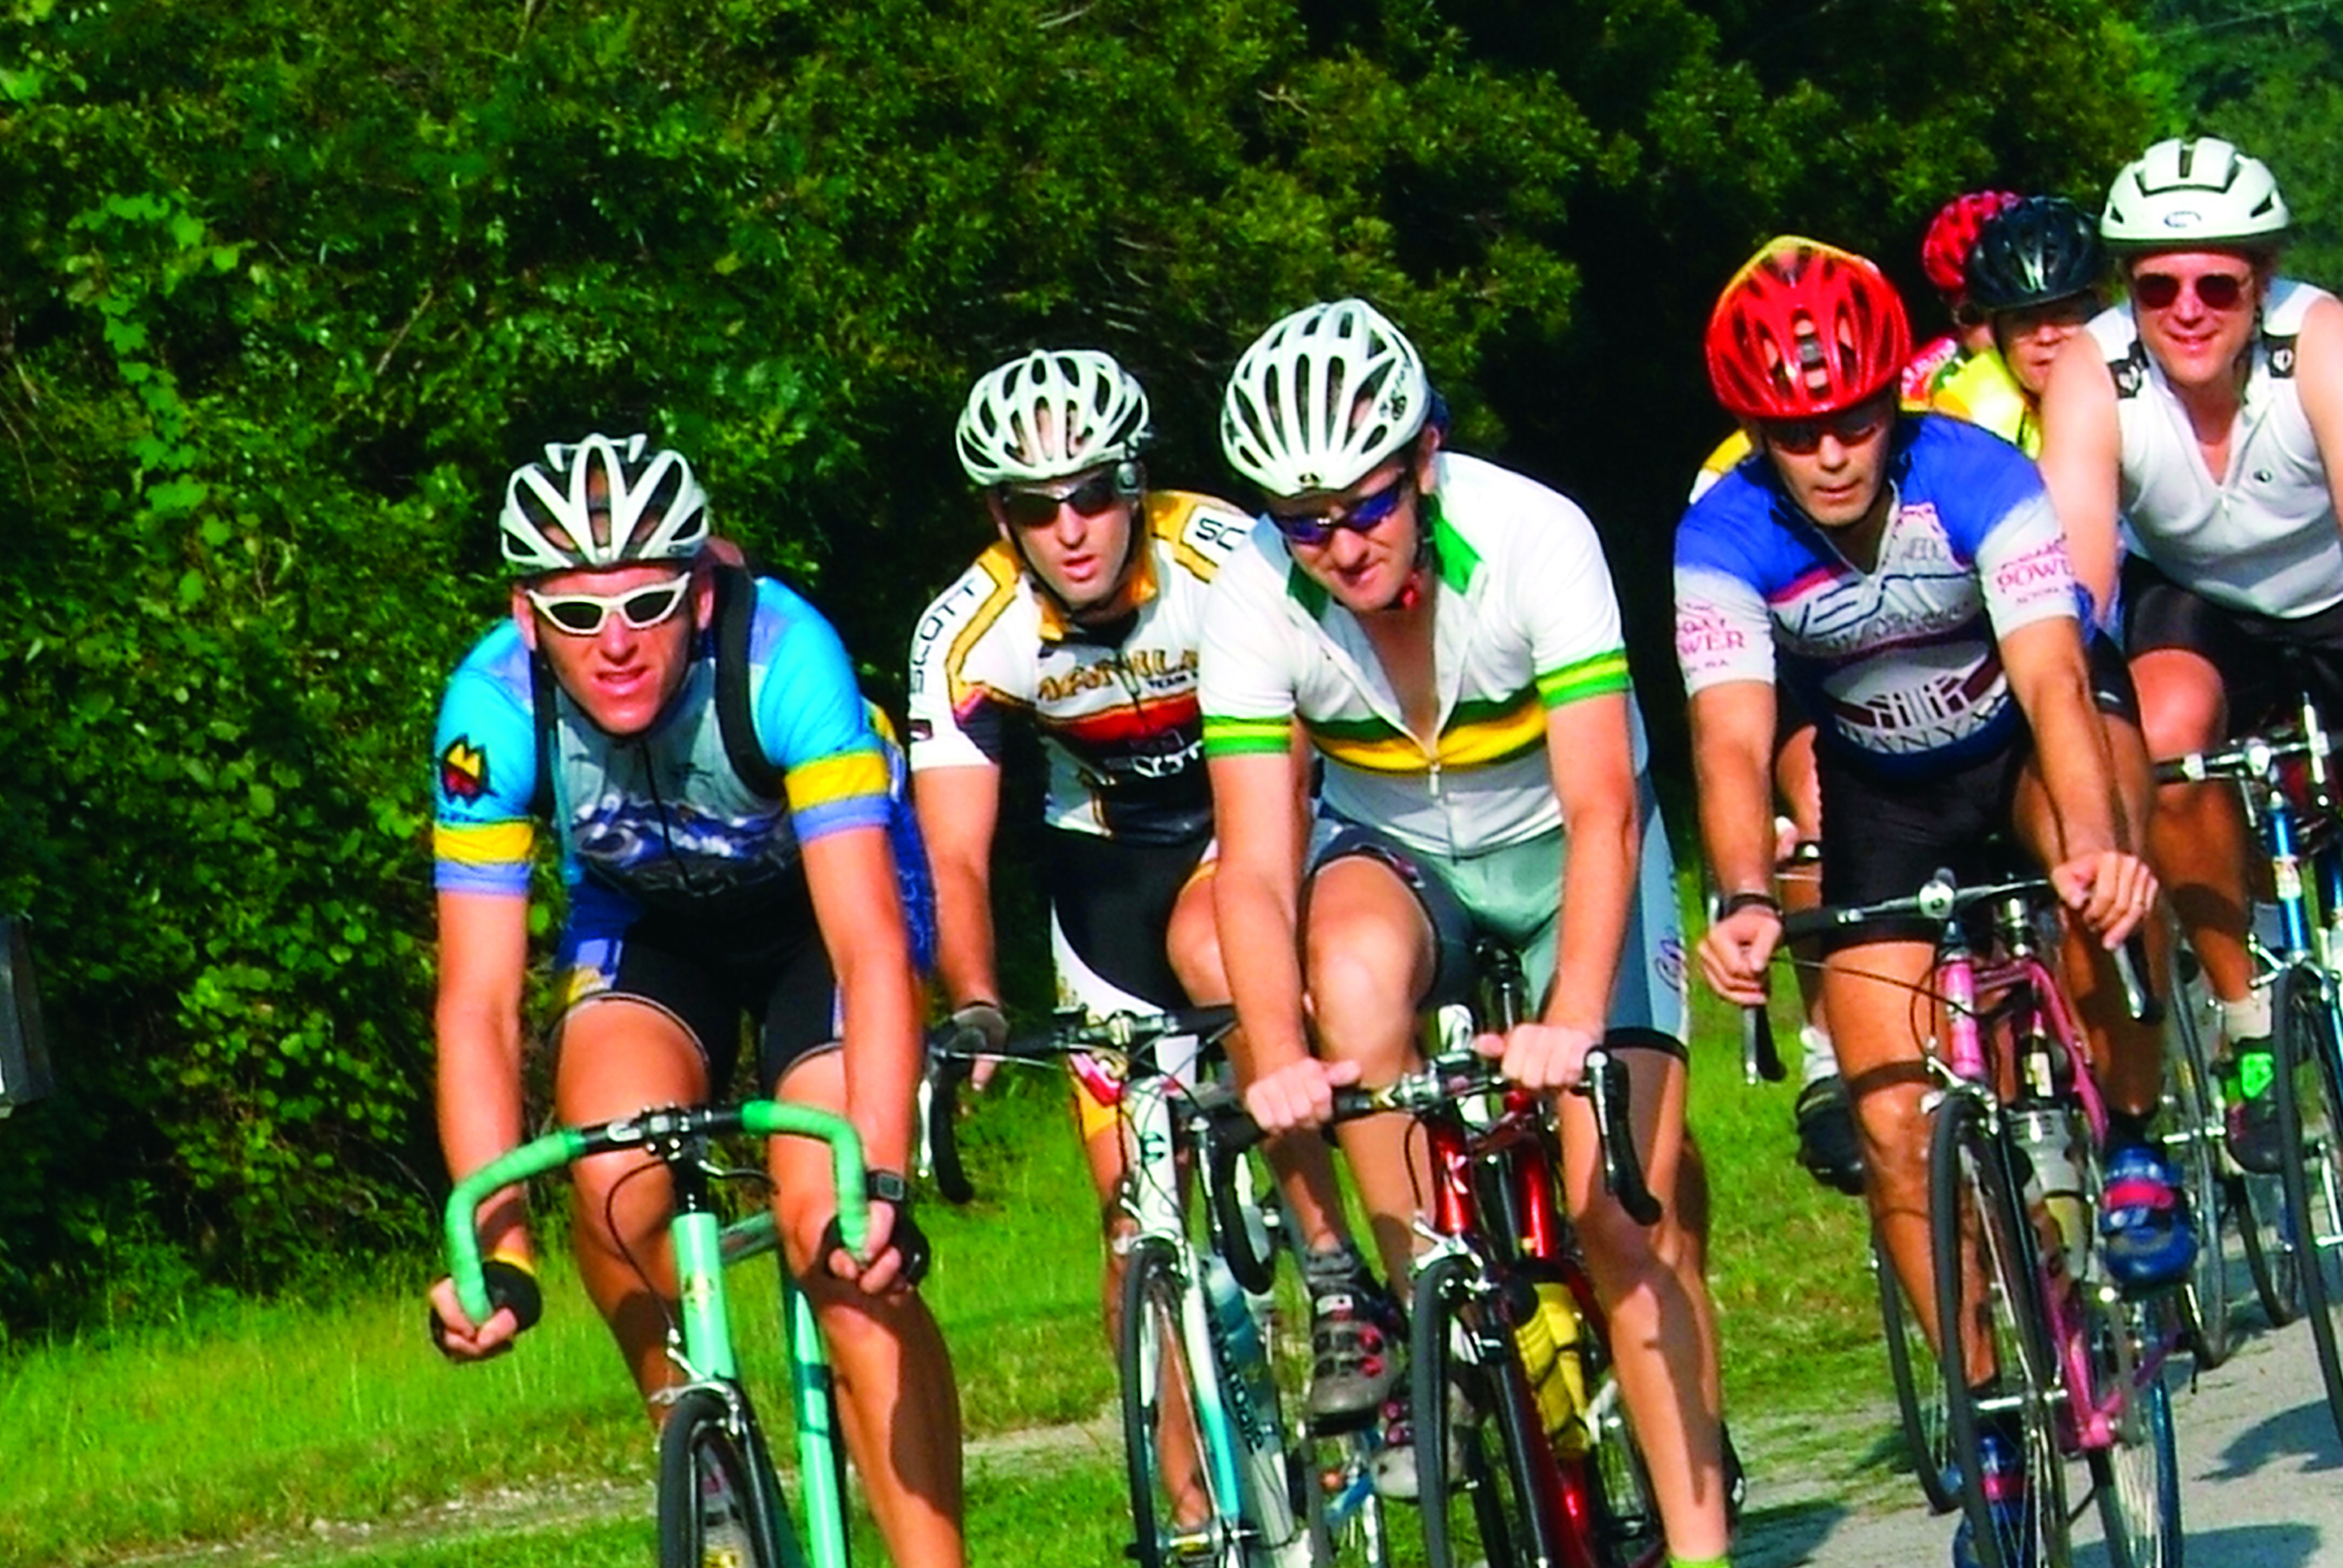 Bikers cycling in Gainesville Florida